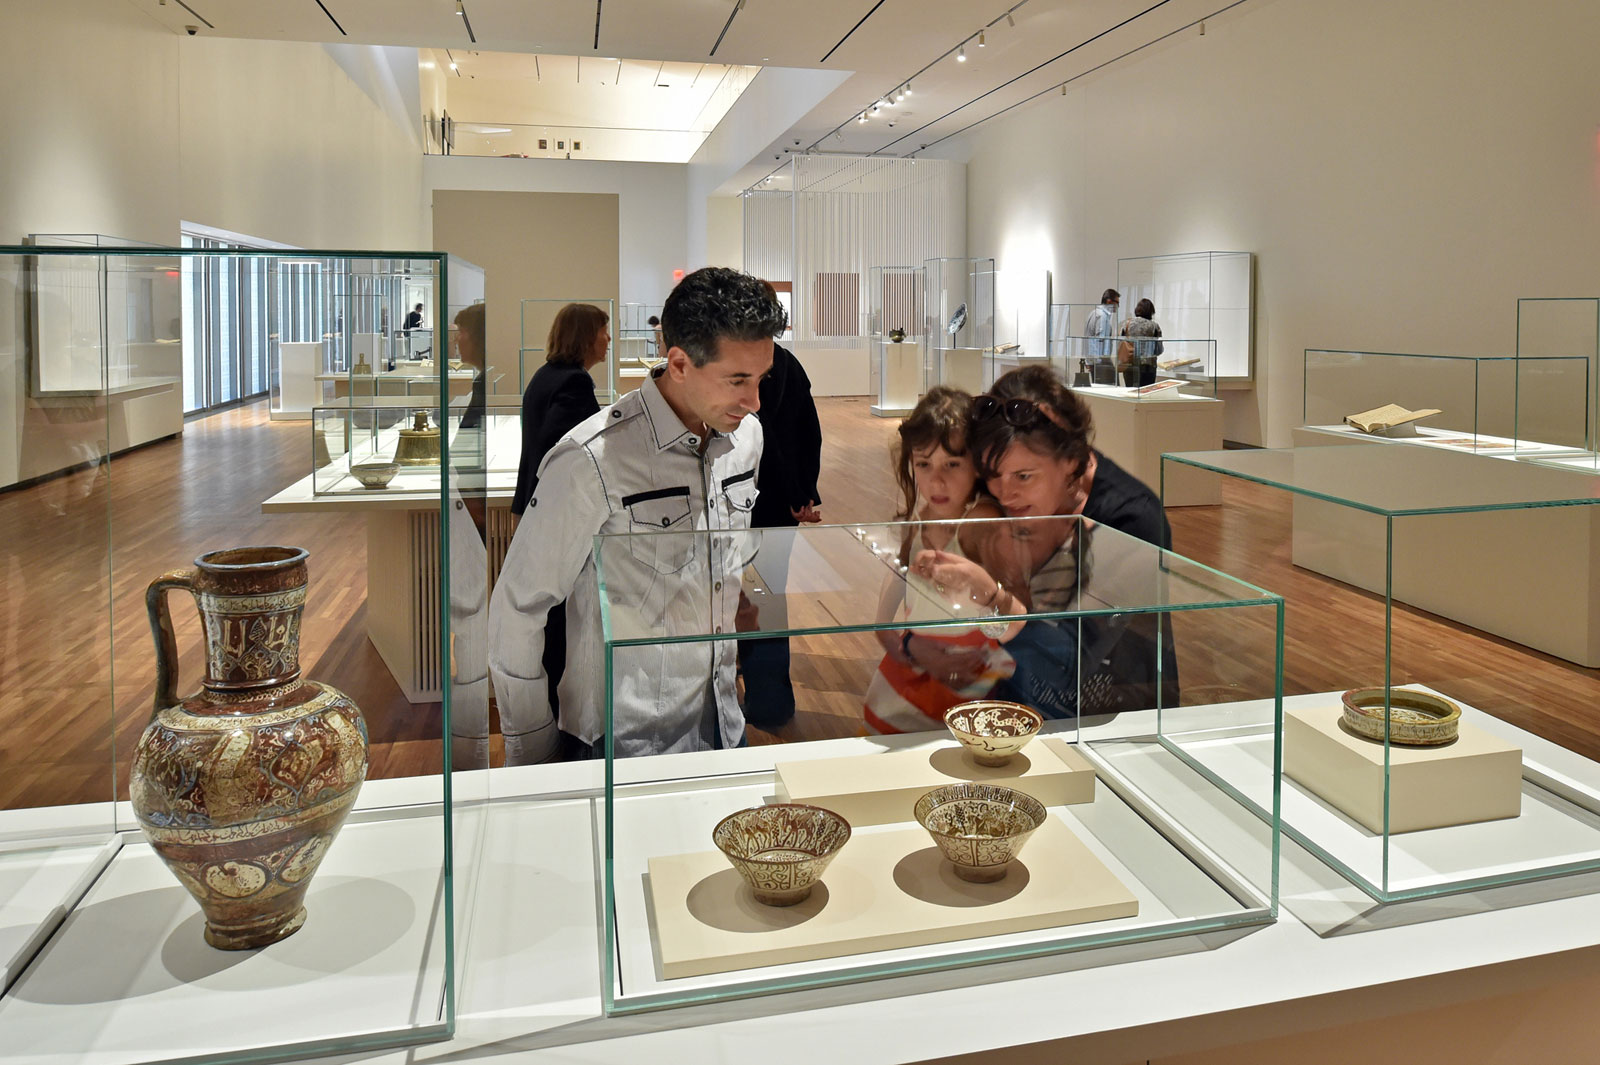 Interior view of a gallery, people viewing items